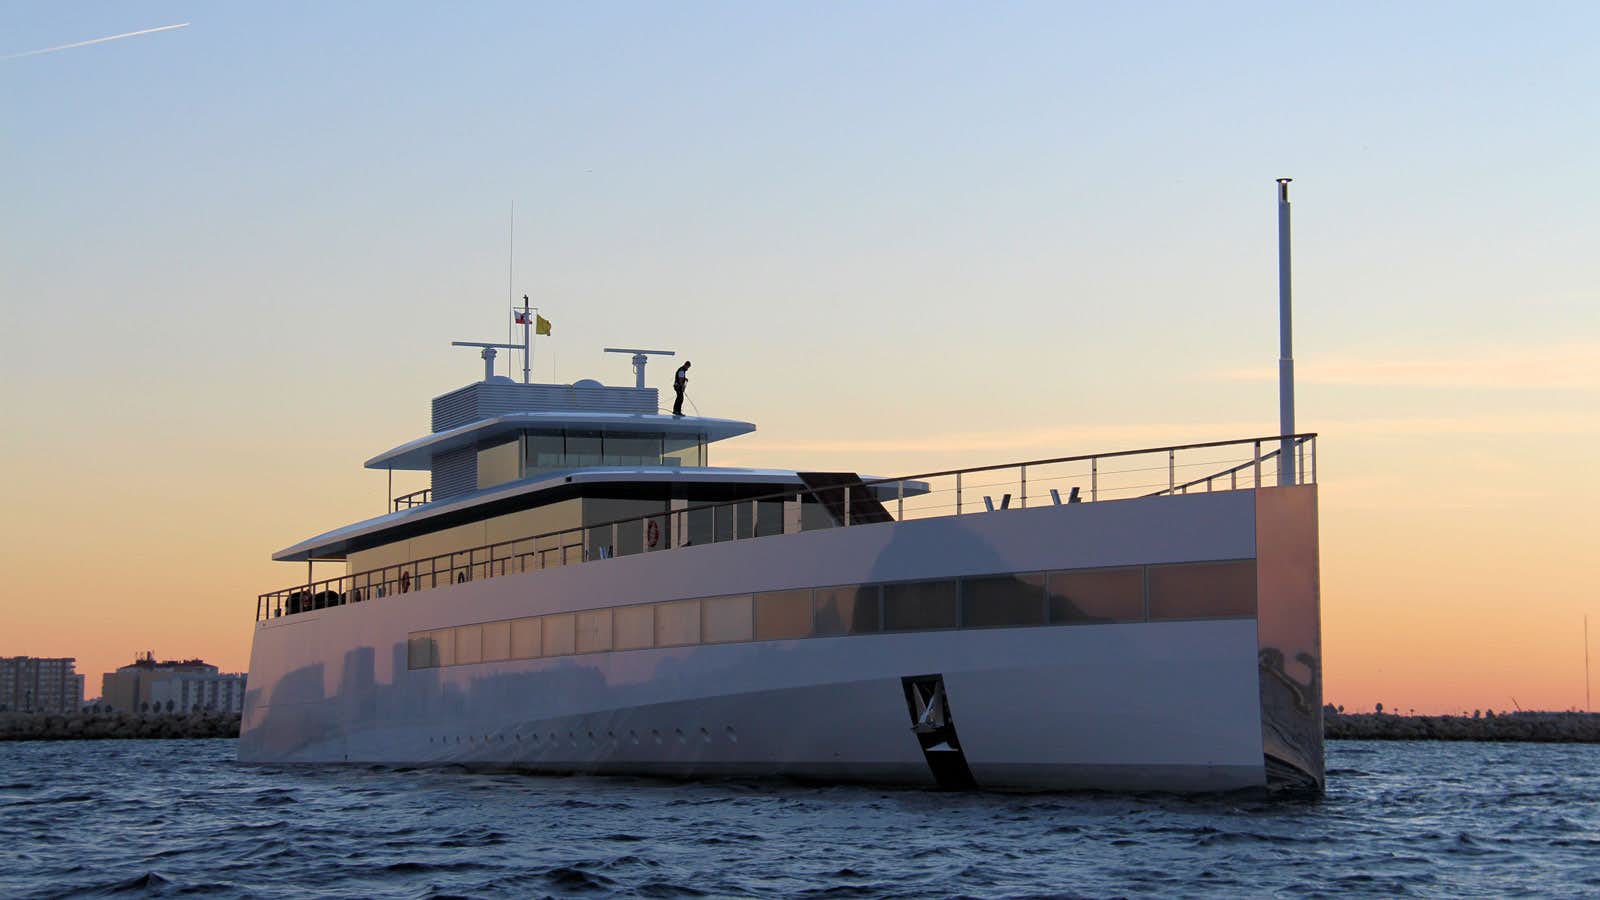 most expensive superyacht ever